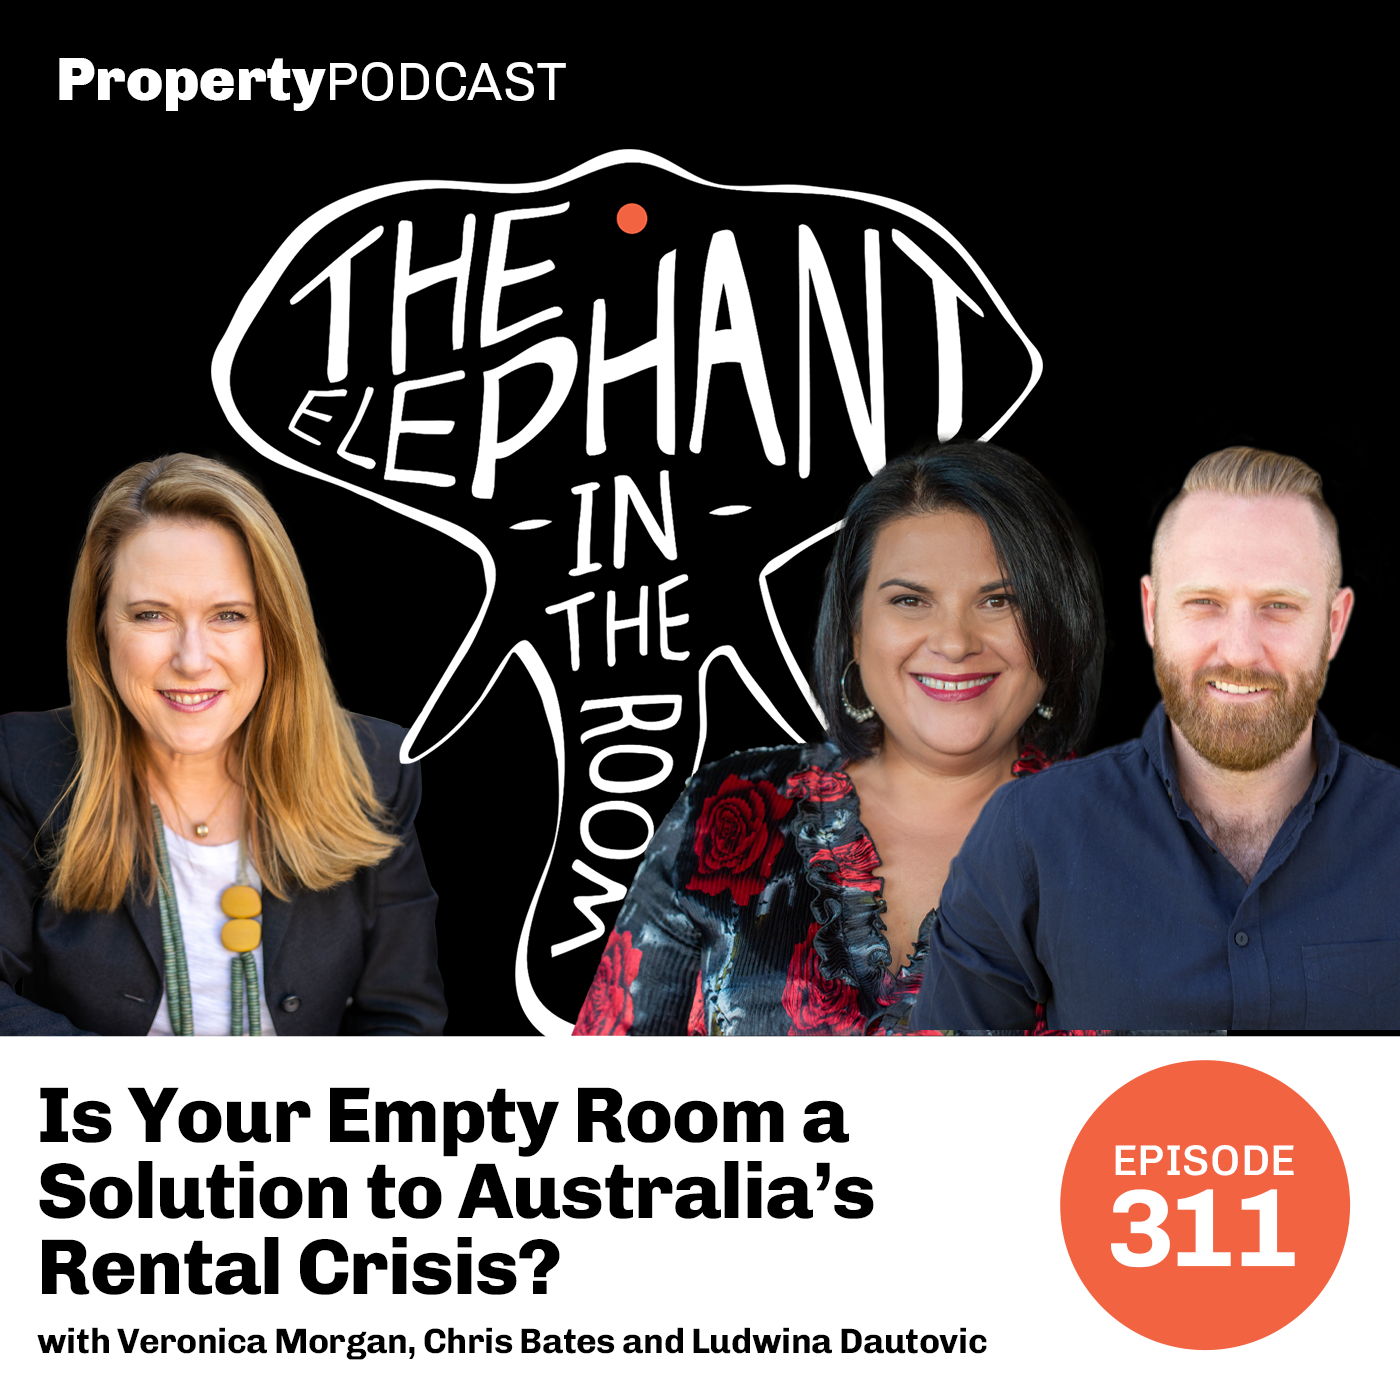 Is Your Empty Room a Solution to Australia’s Rental Crisis?